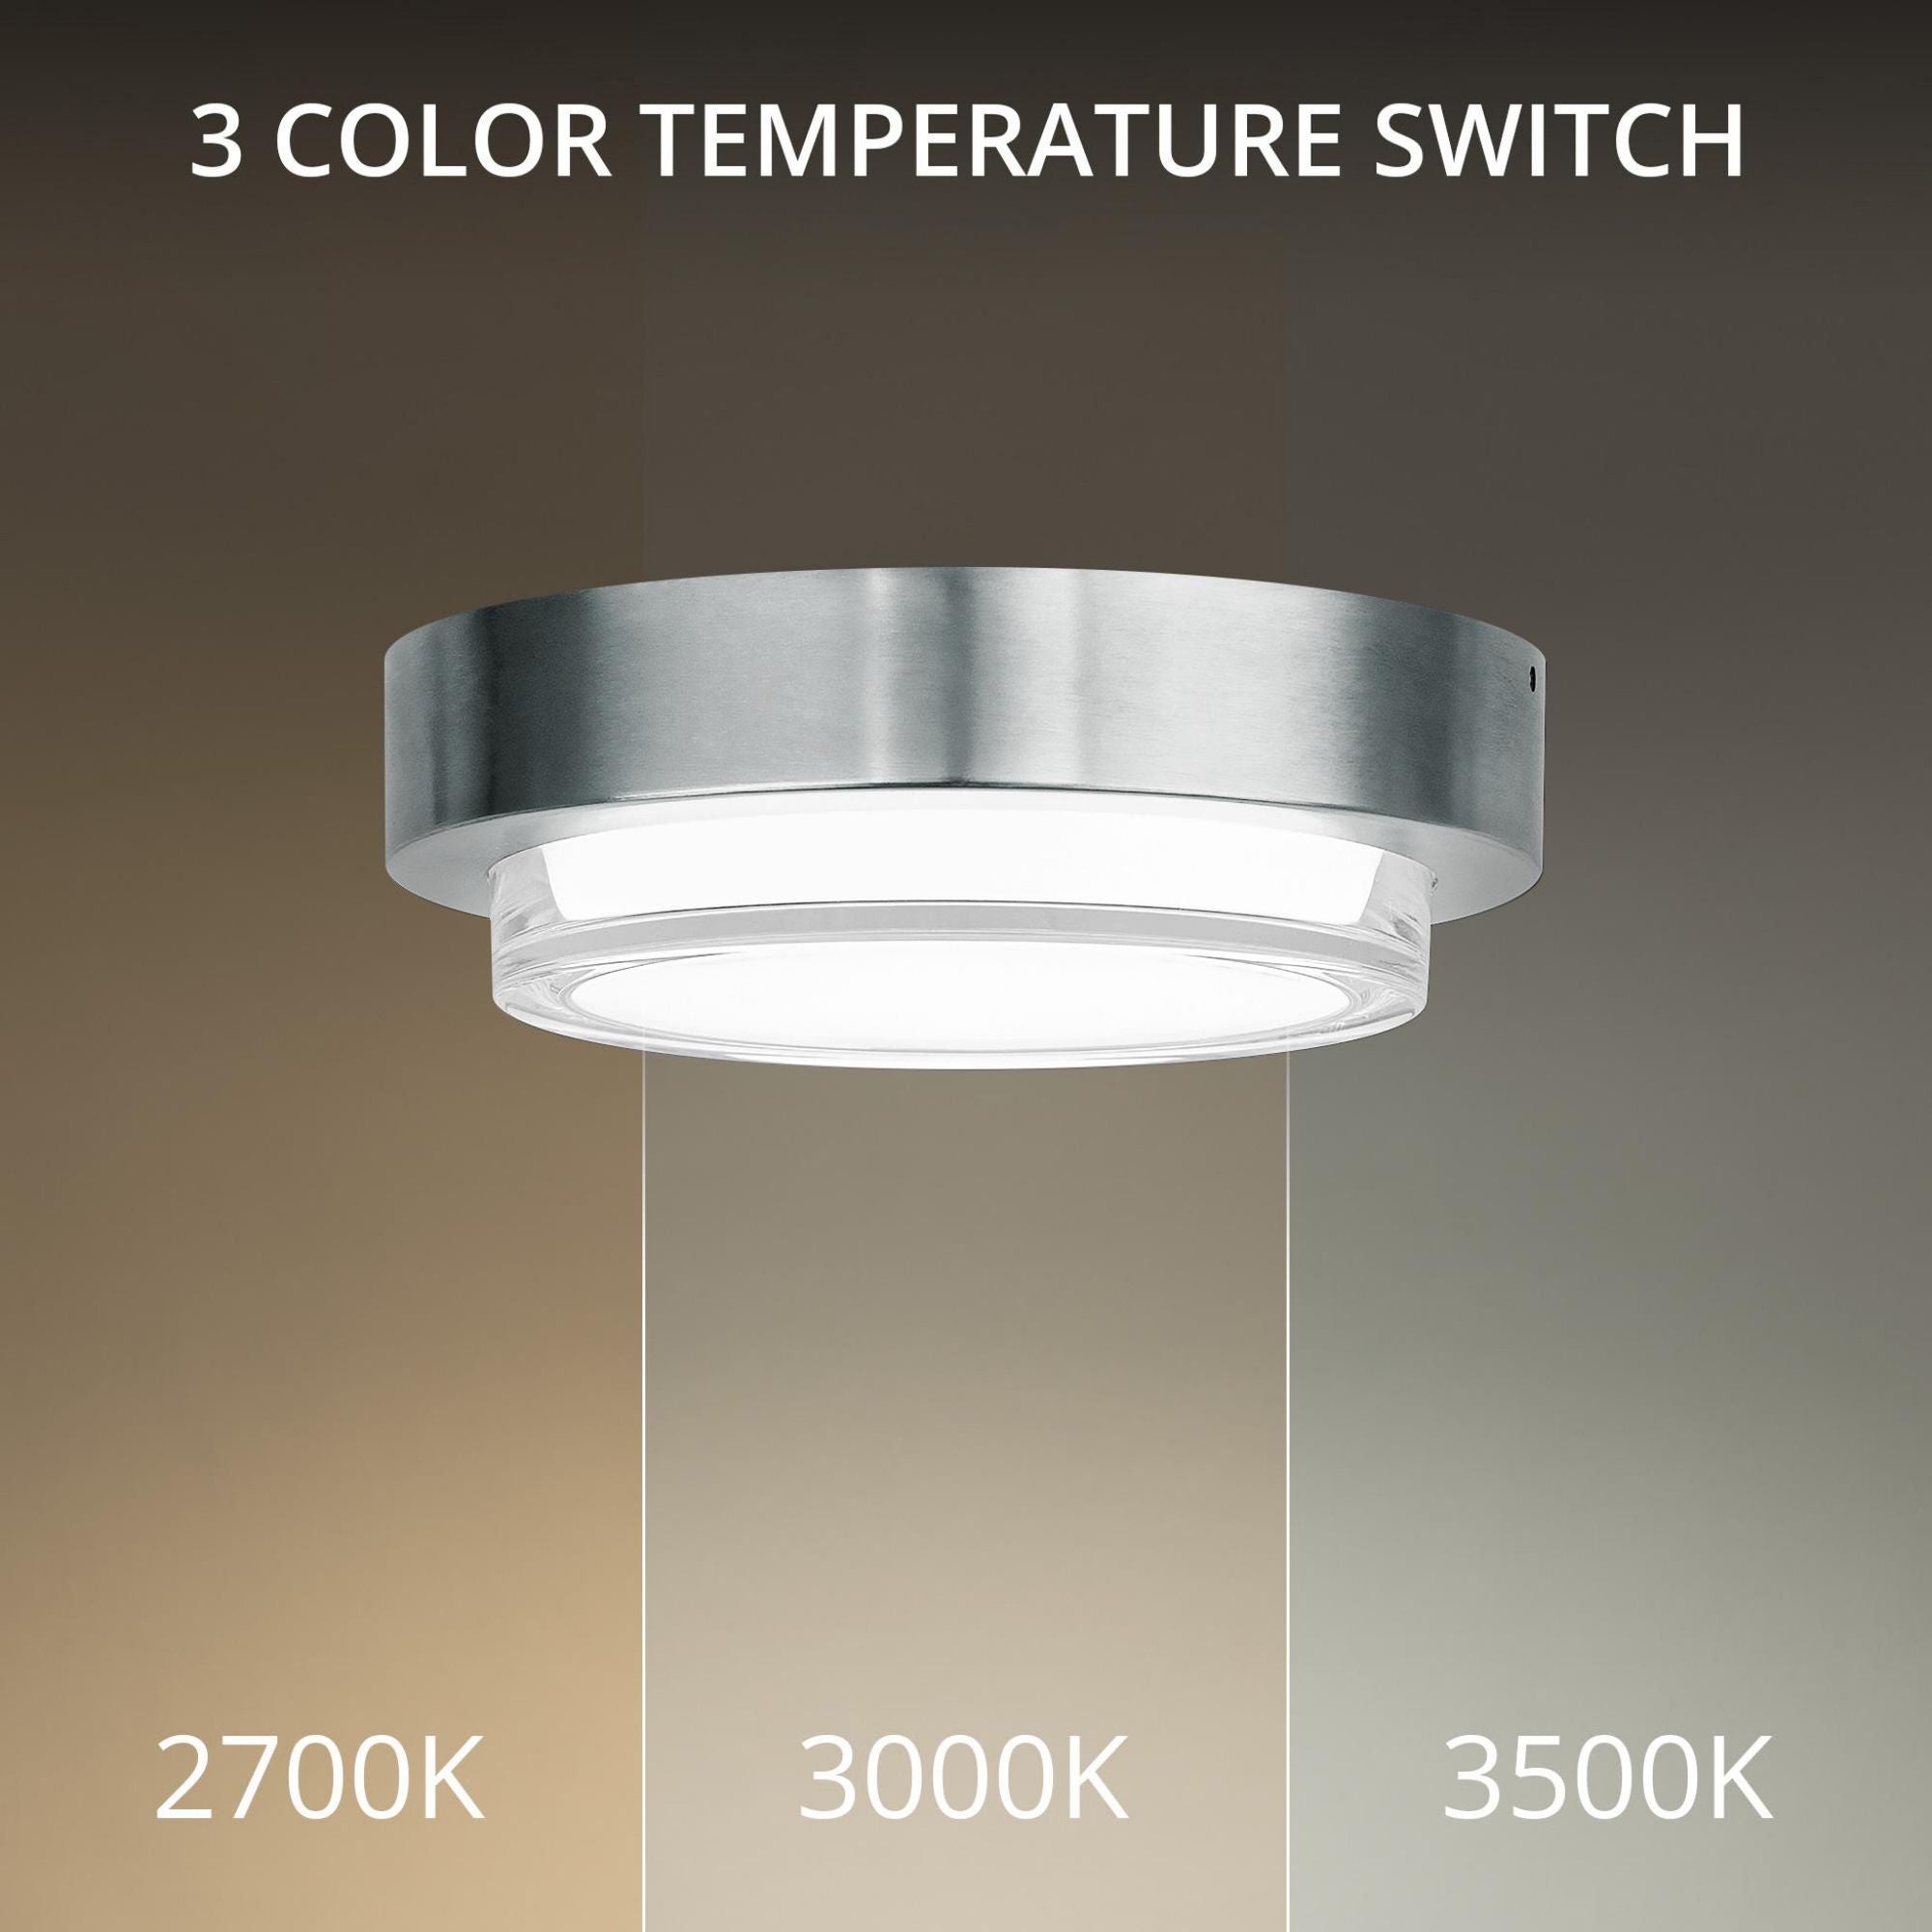 Kind 8in LED Round Indoor or Outdoor Flush Mount 3-CCT 2700K-3000K-3500K Set to 2700K in Stainless Steel